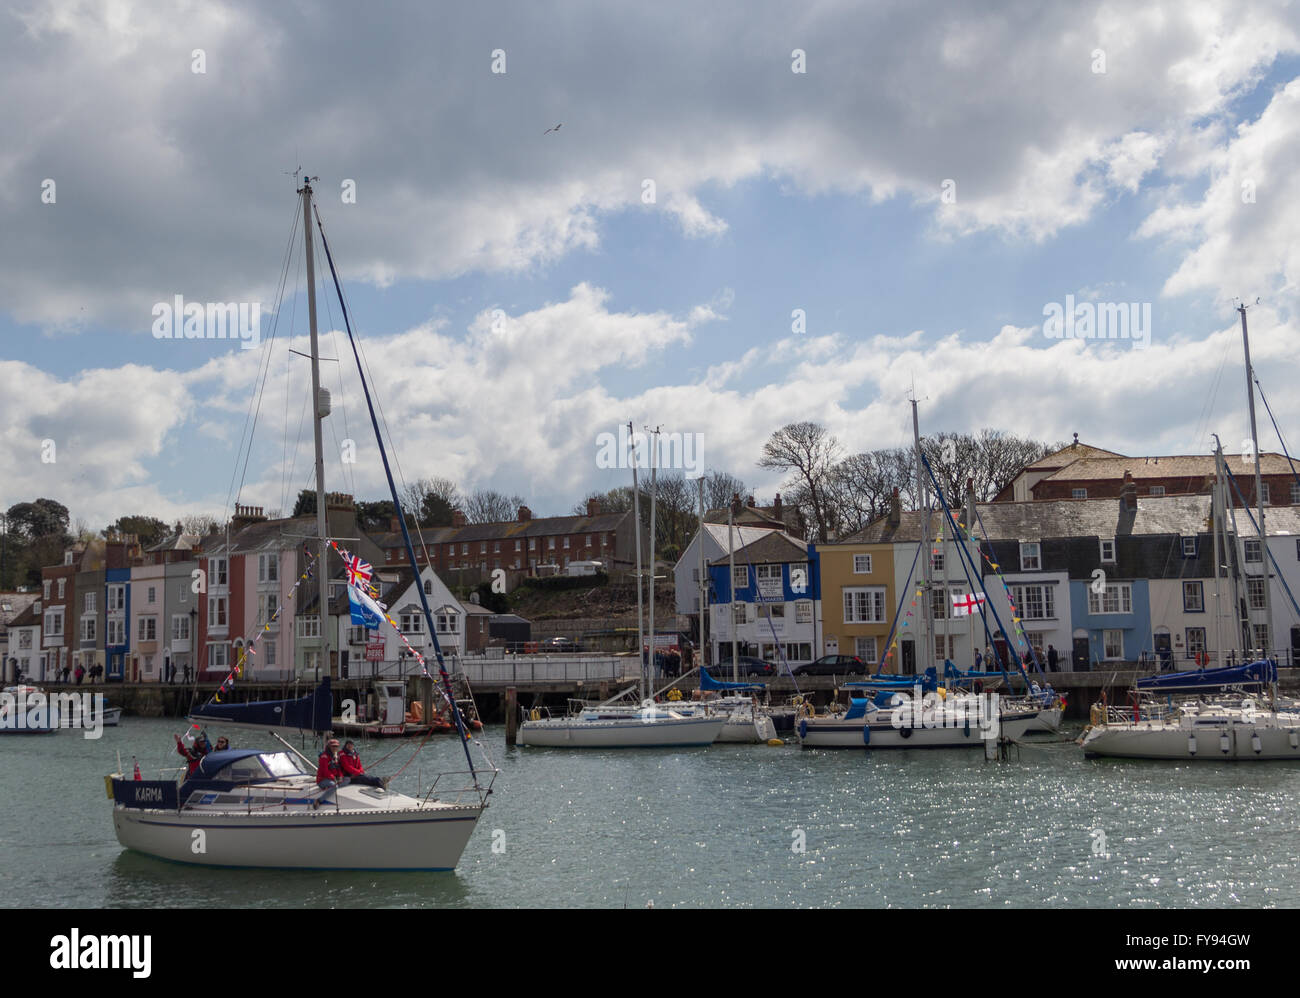 Weymouth, England. 23 April 2016. Queen's 90th Birthday Floating Tribute. Karma, two people sitting on front, distan. Credit:  Frances Underwood/Alamy Live News Stock Photo